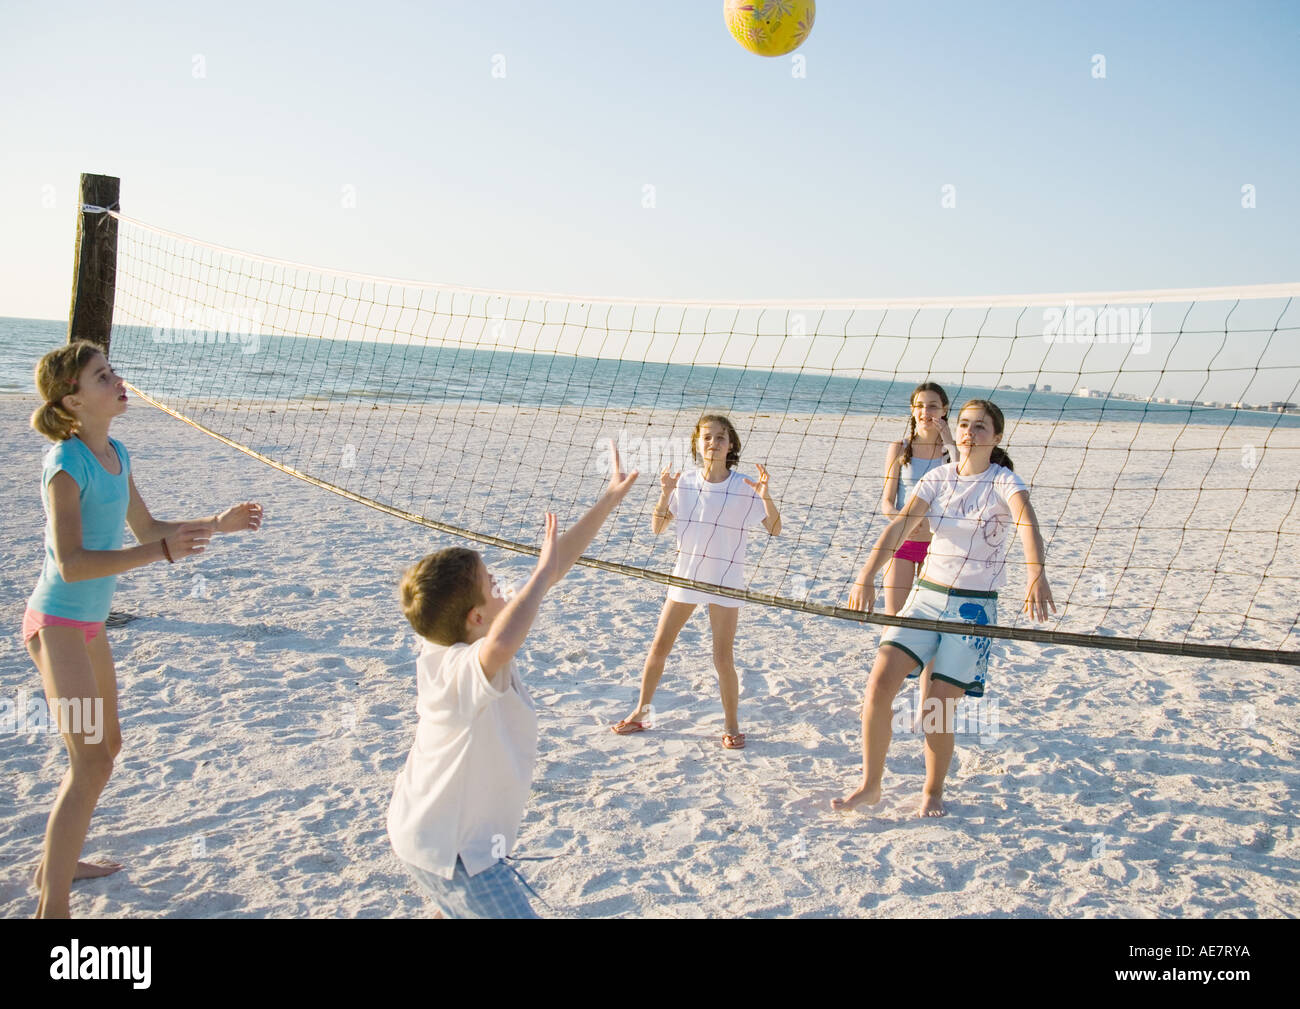 Group of kids playing beach volleyball Stock Photo - Alamy